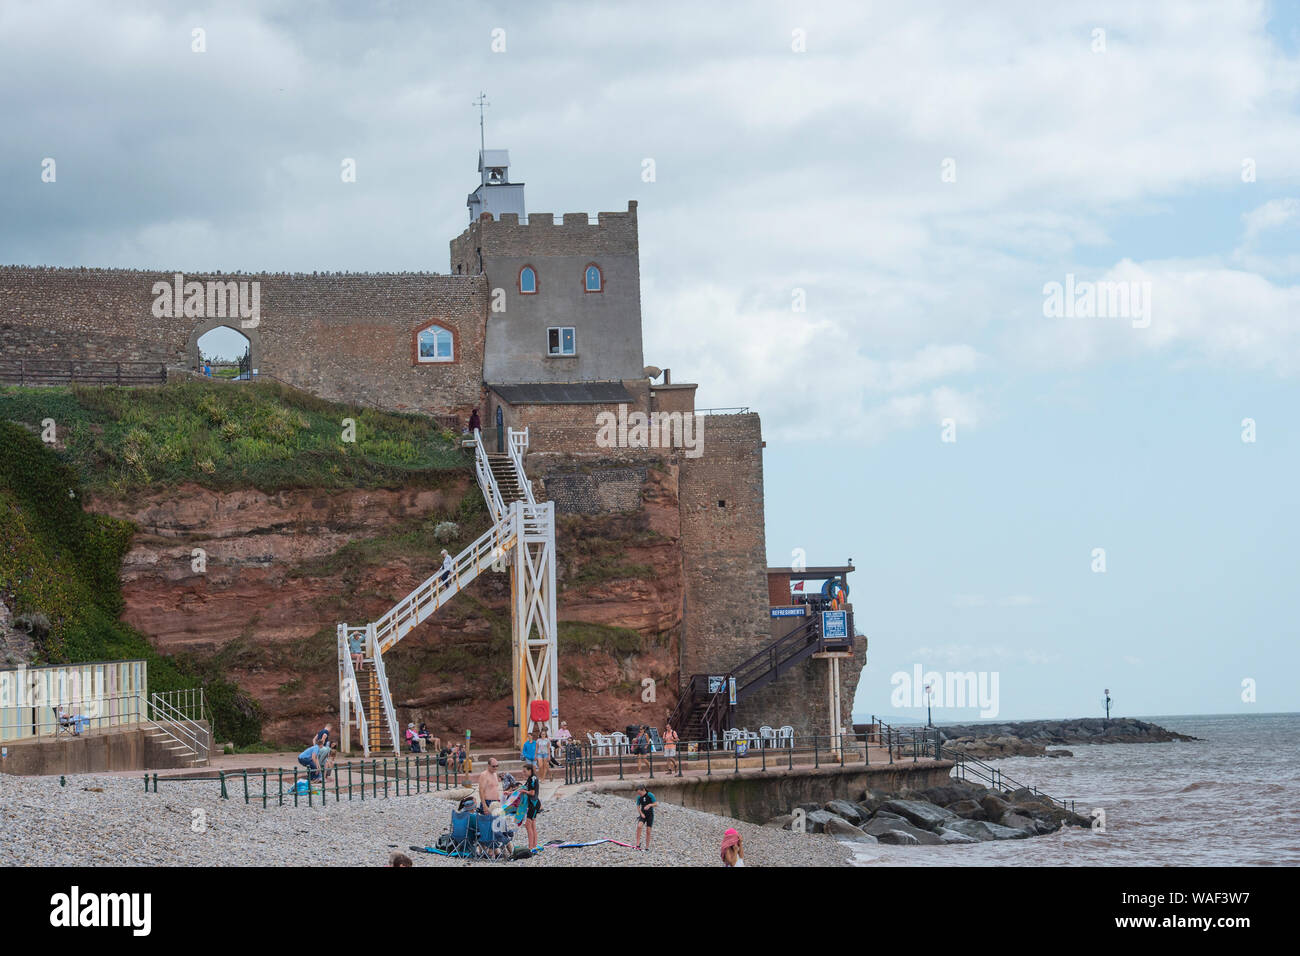 jacobs Ladder, sidmouth Stock Photo